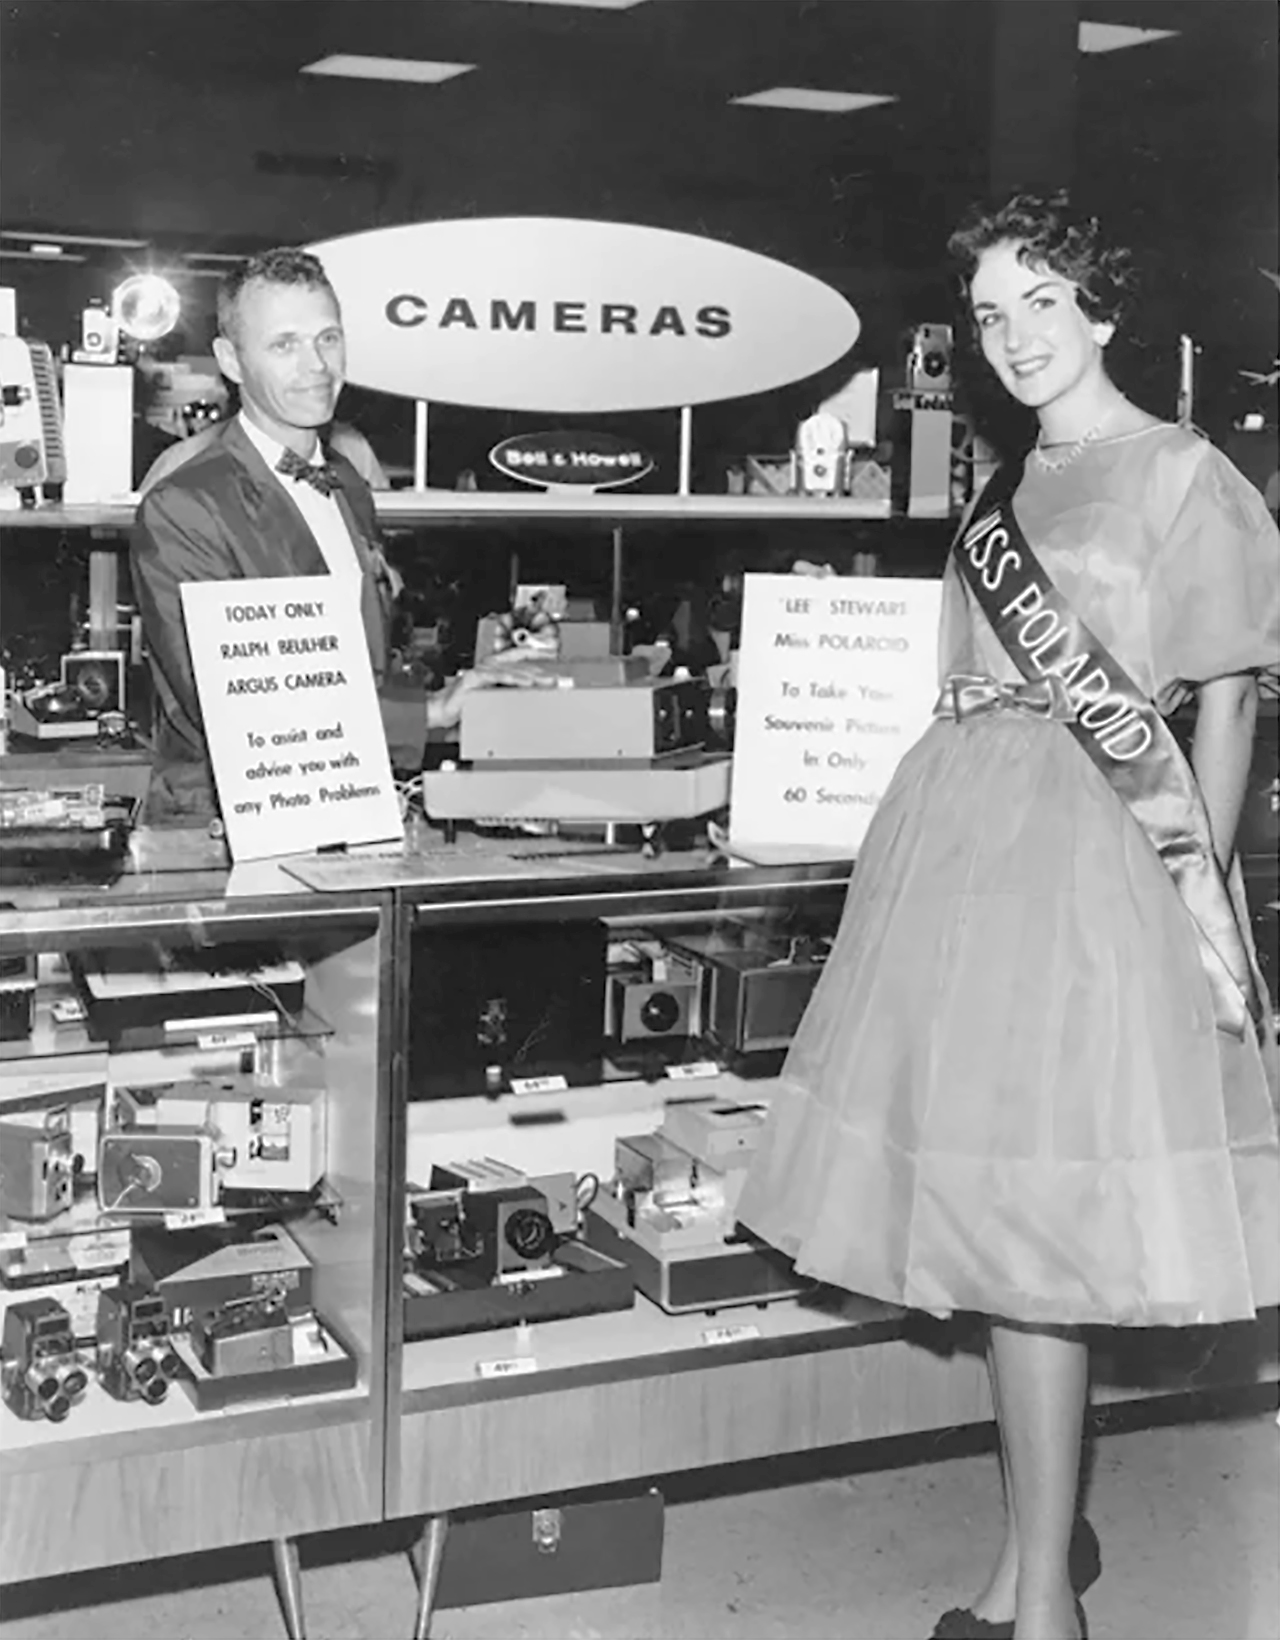 1280x1640px-Shopping-for-Argus-cameras-in-the-1930's-vWA24